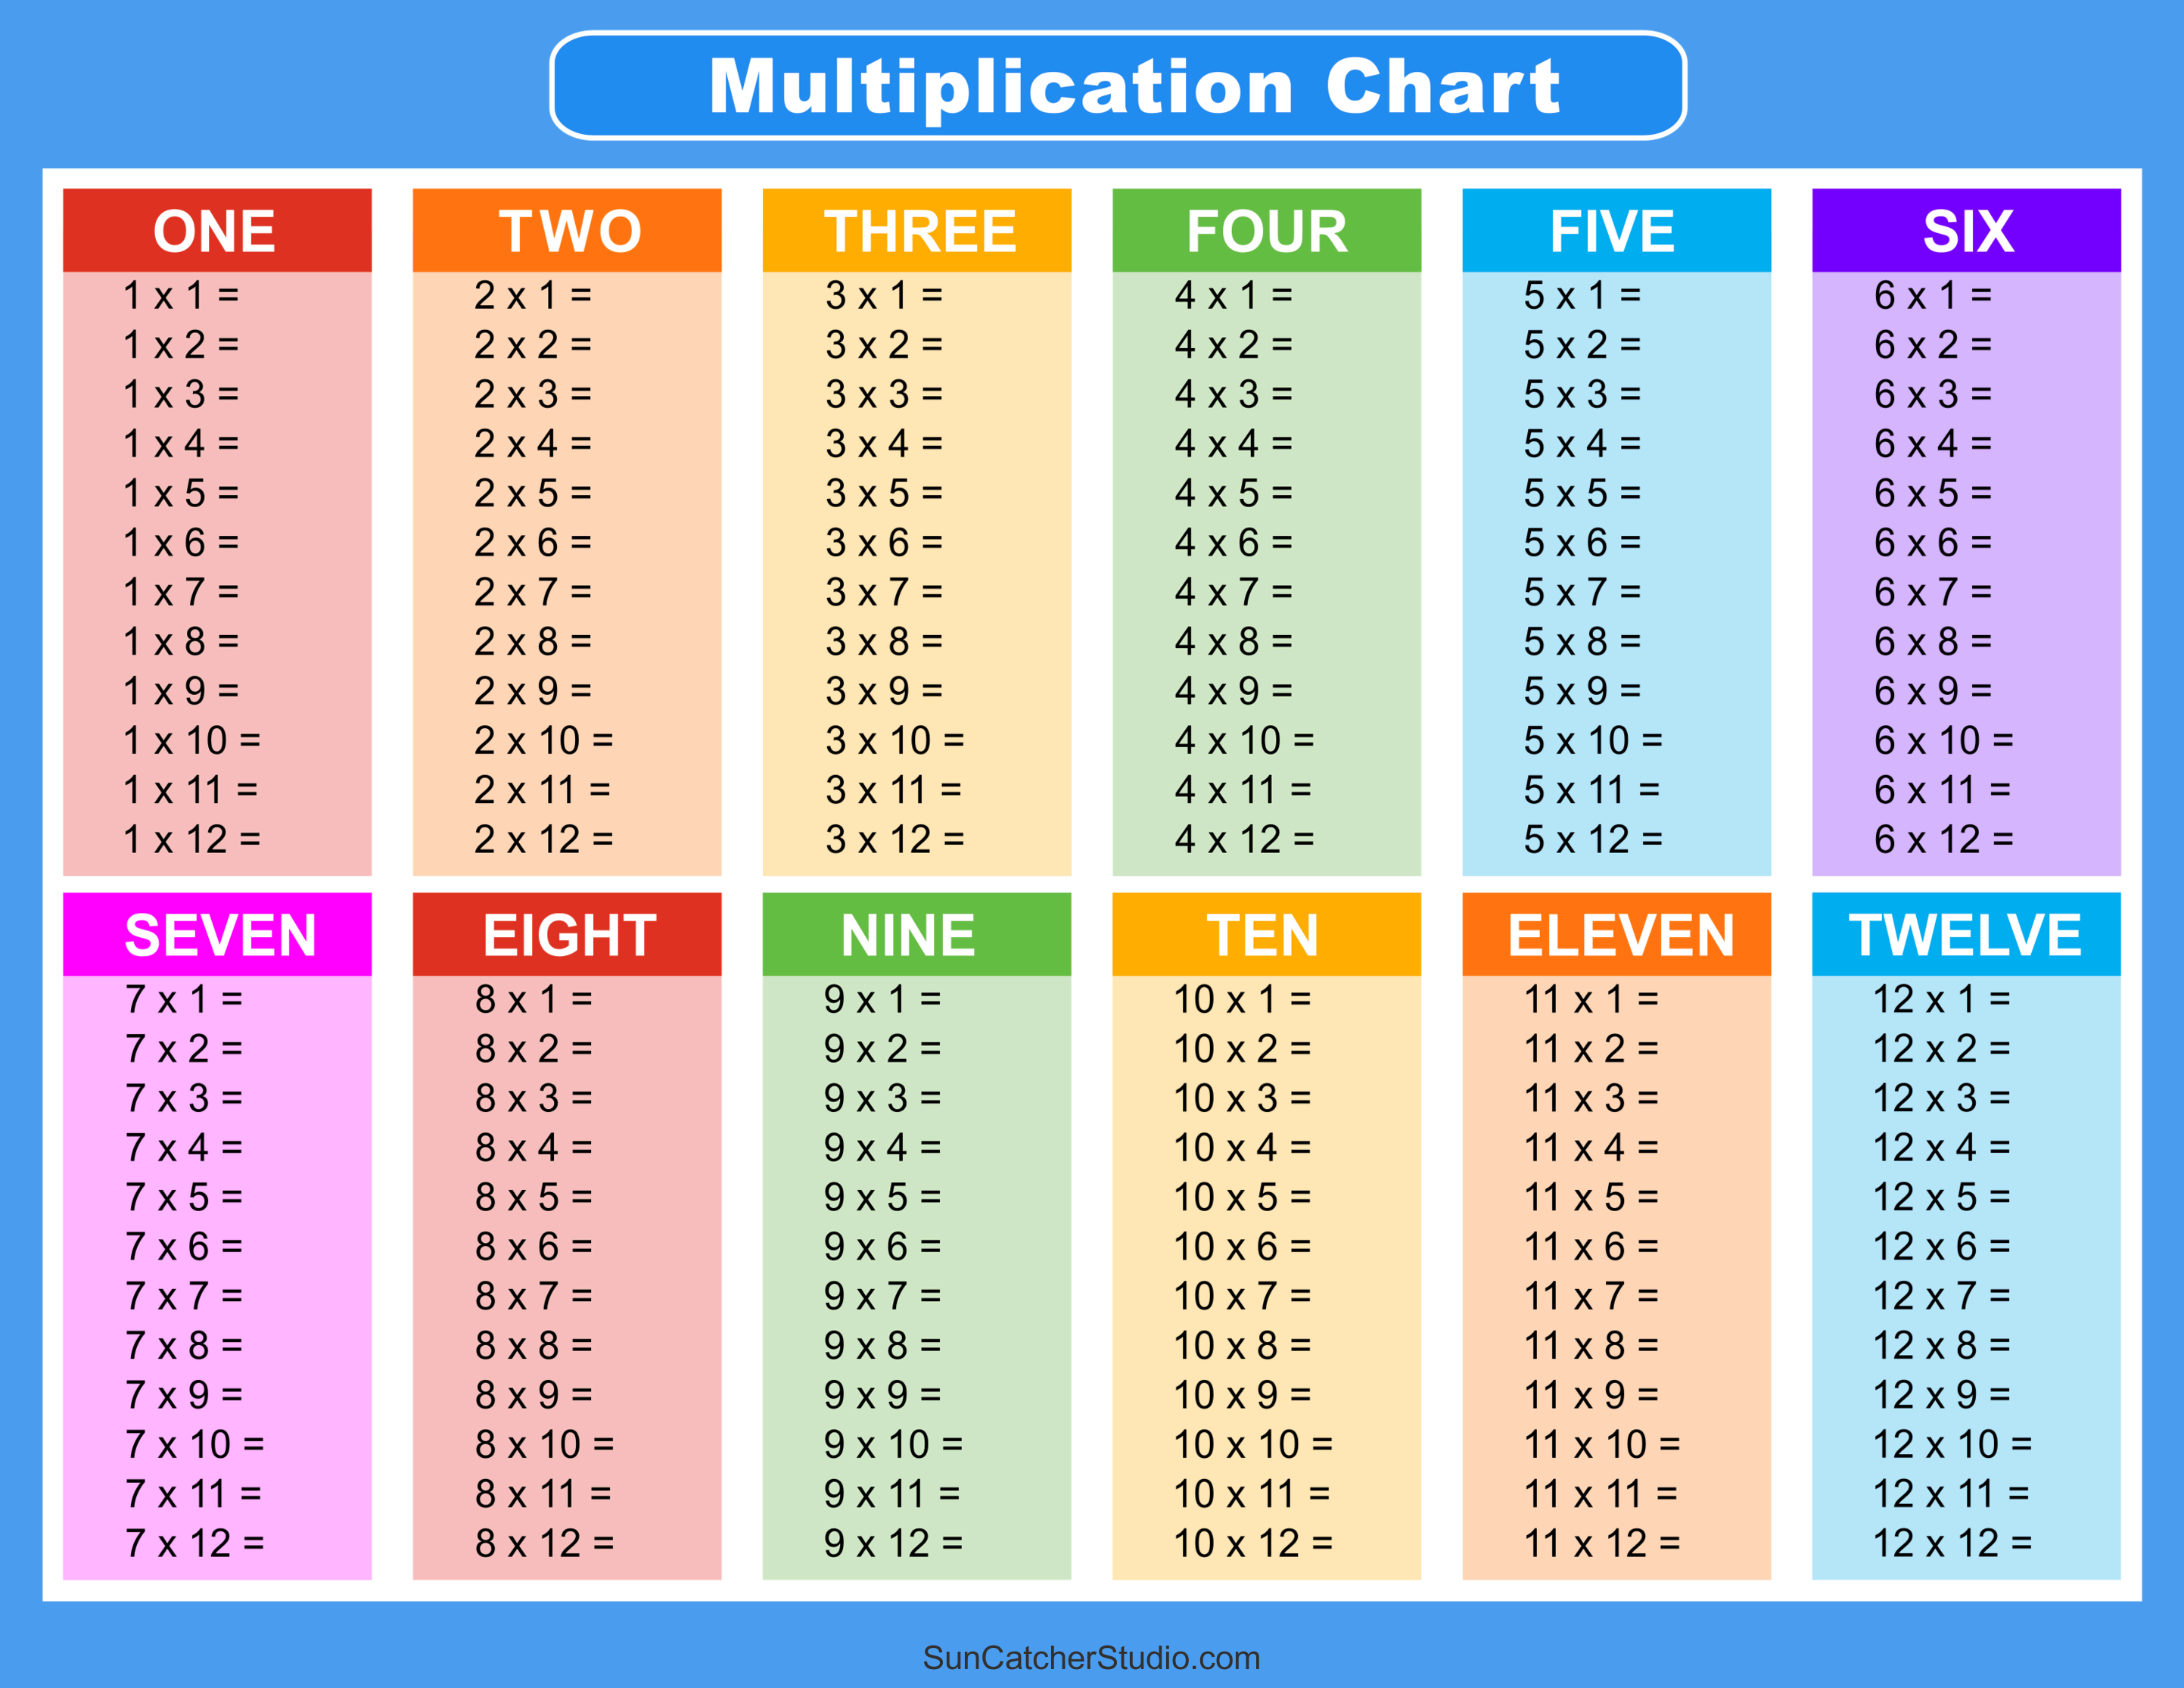 Multiplication Charts PDF Free Printable Times Tables DIY Projects Patterns Monograms Designs Templates